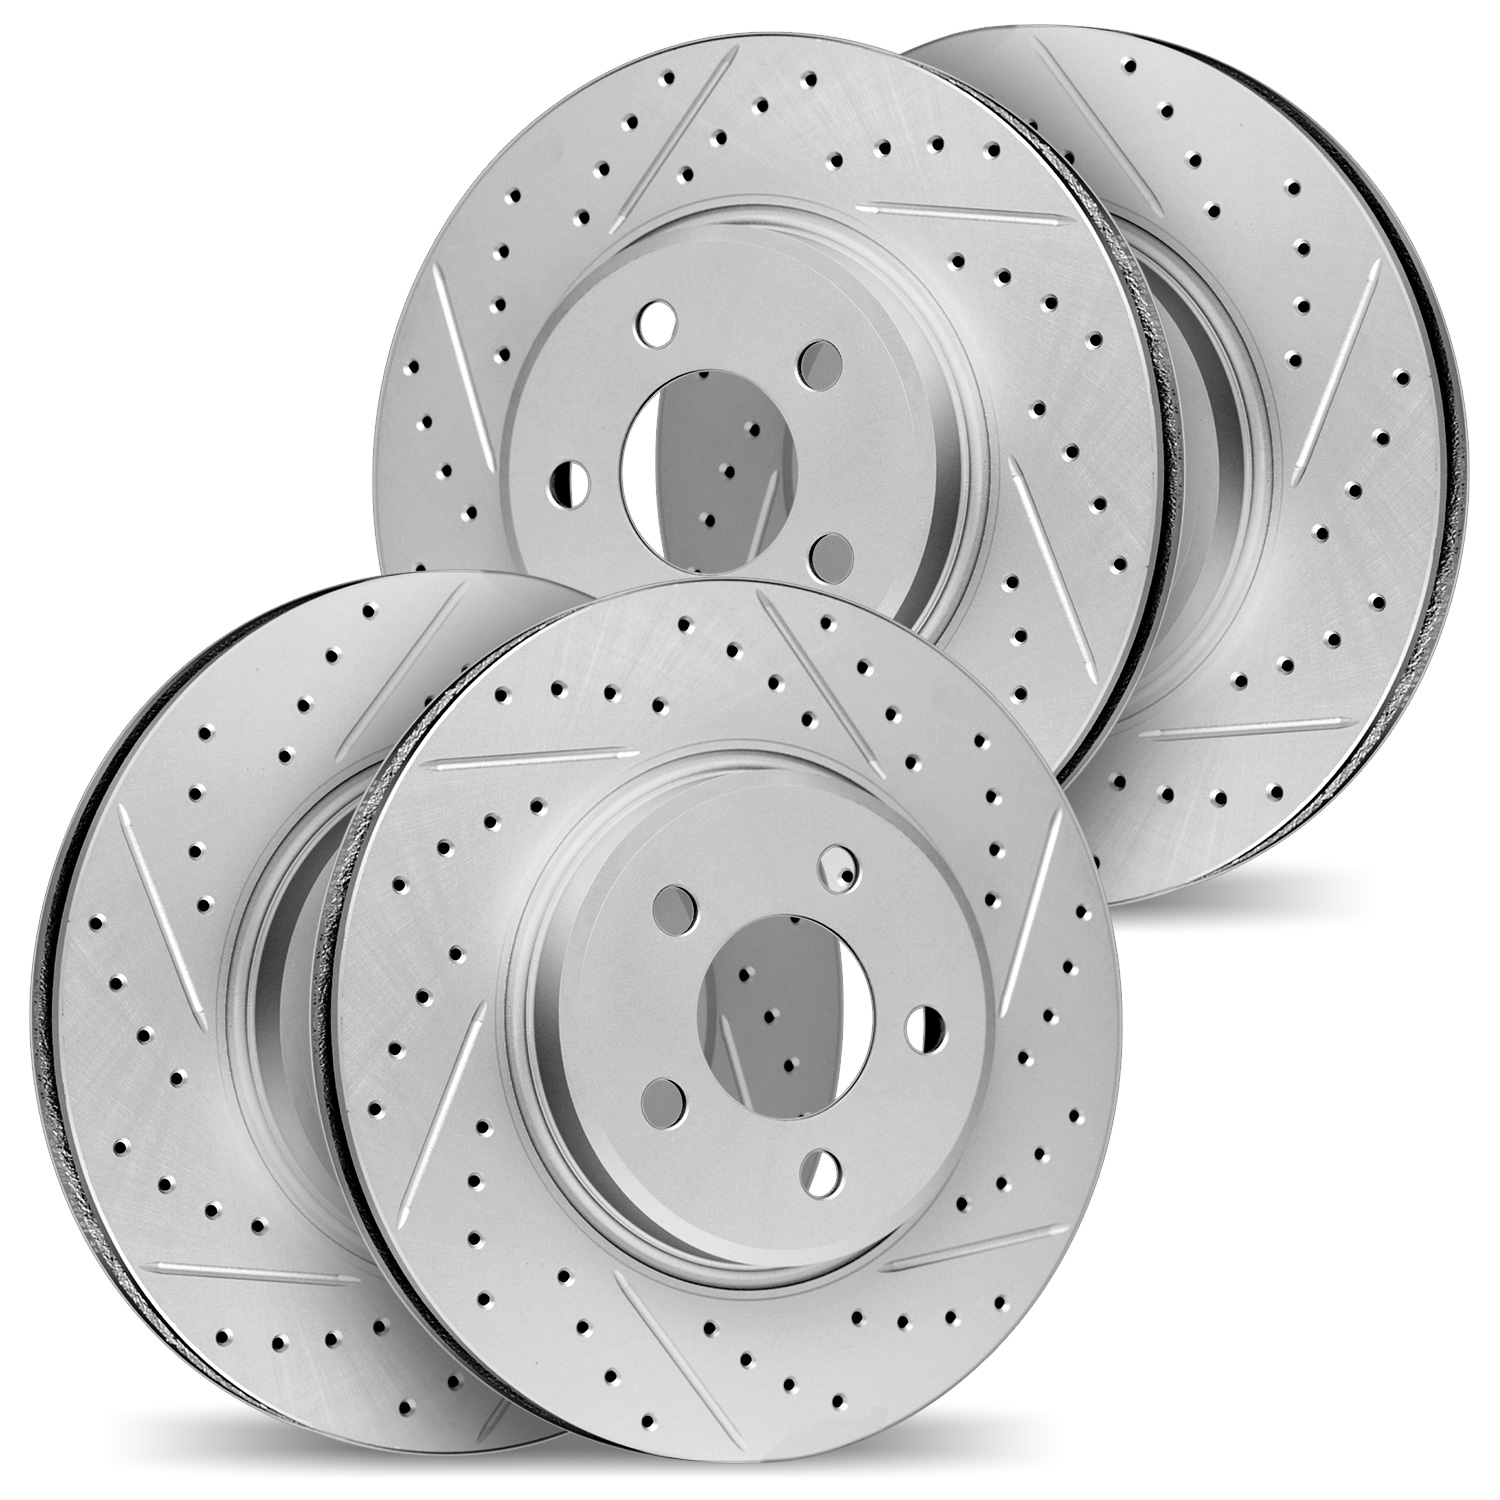 2004-80034 Geoperformance Drilled/Slotted Brake Rotors, 2004-2011 Ford/Lincoln/Mercury/Mazda, Position: Front and Rear